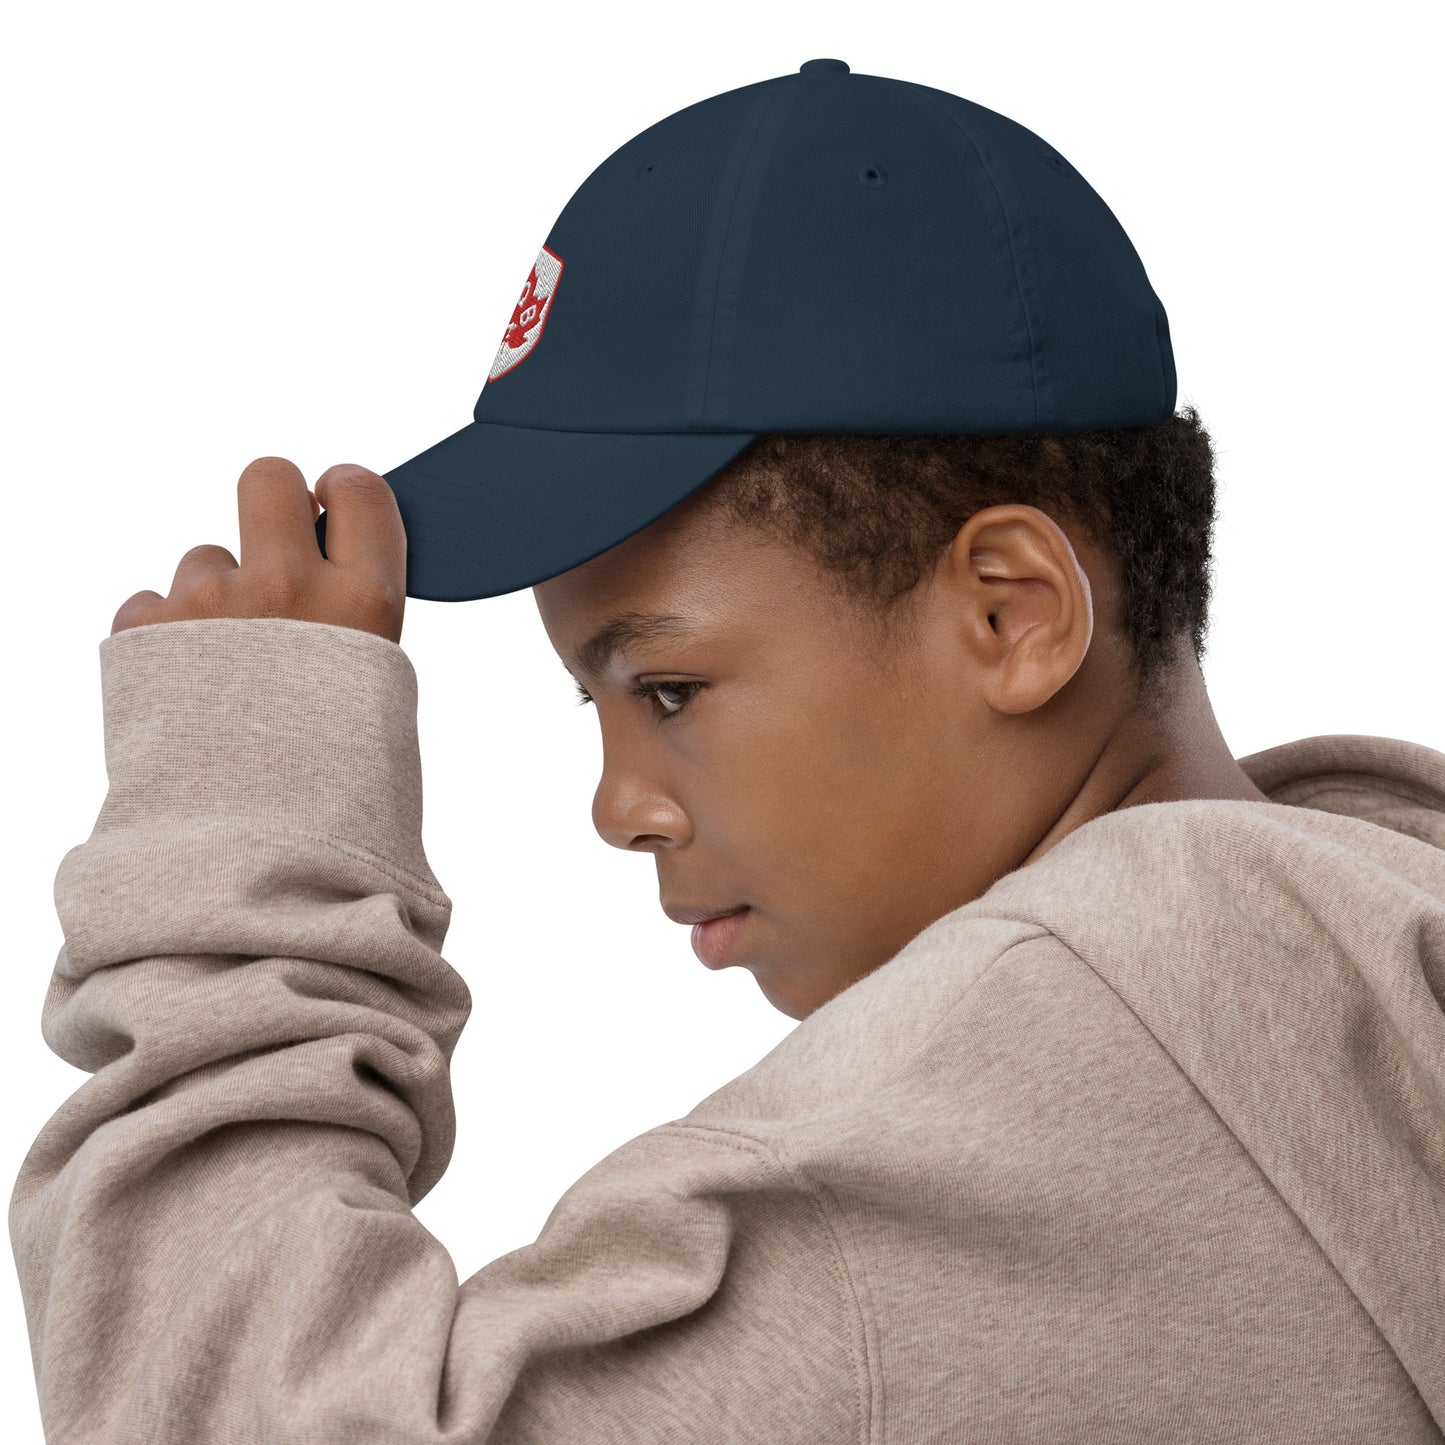 Maple Leaf Kid's Cap - Red/White • YQB Quebec City • YHM Designs - Image 09